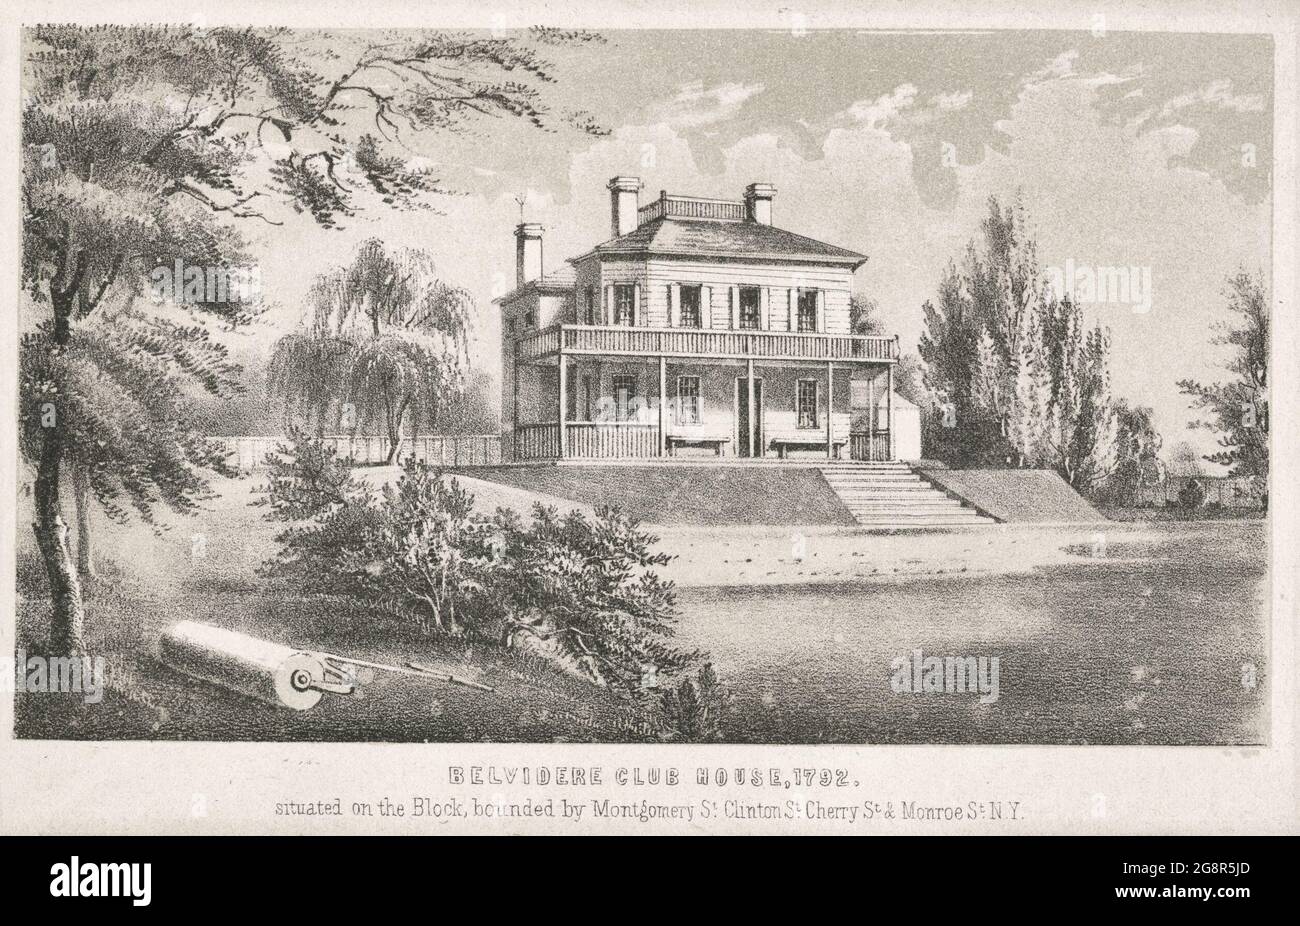 Belvidere Club House, 1792, situated on the block bounded by Montgomery St. Clinton St., Cherry St. & Monroe St. Stock Photo